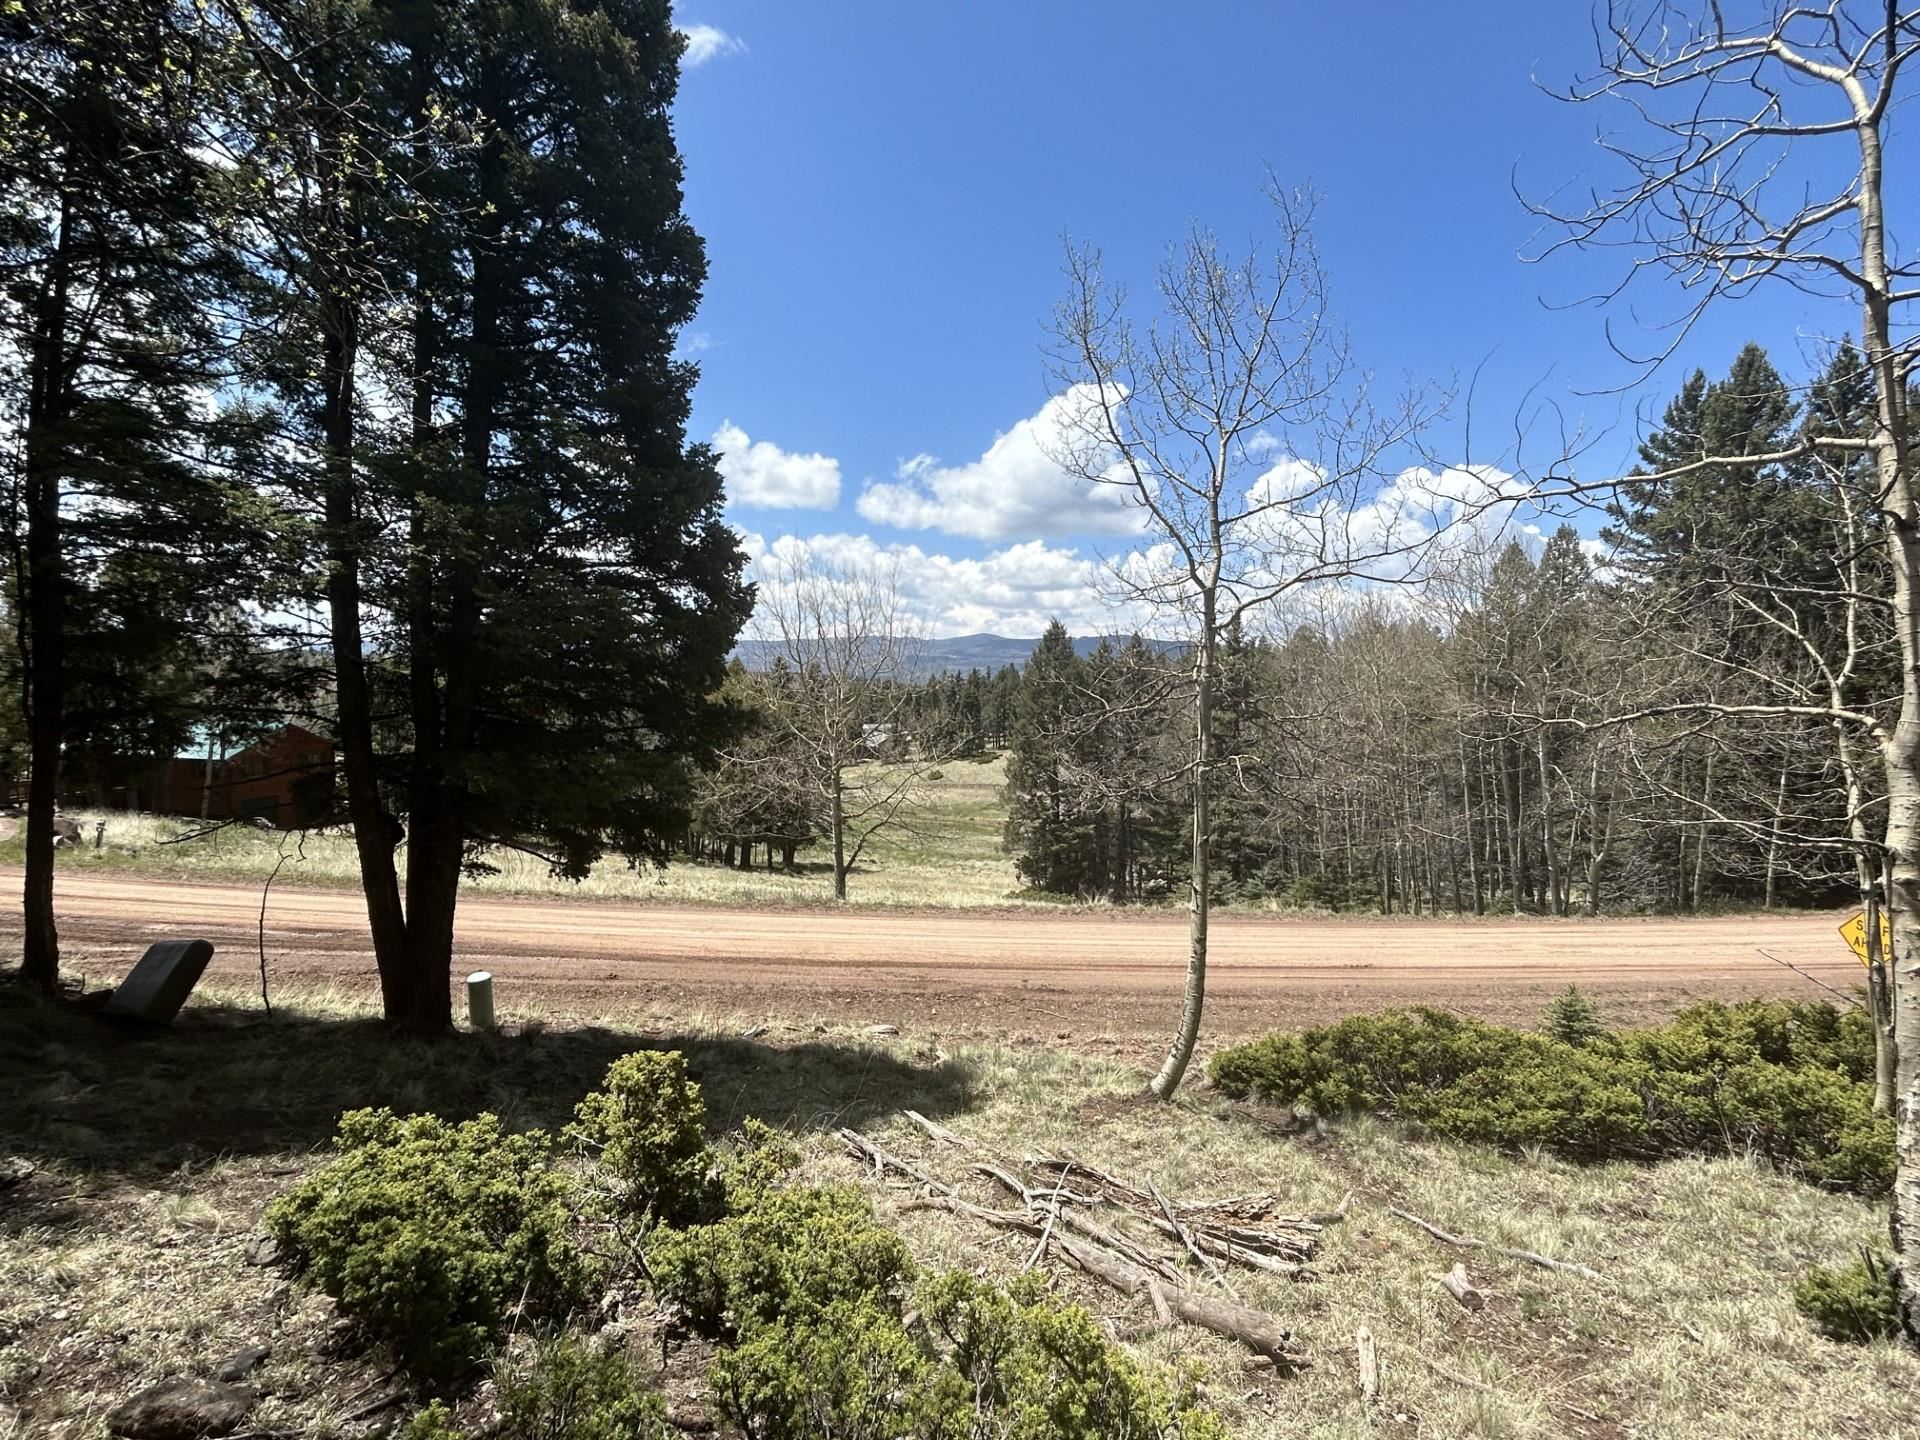 Beautiful property on 2.5 acres with potential mountain views. Three lots that can be combined together or sold separately. Located on a quiet Cul-De-Sac with low traffic. Lot has a gentle slope to make an easier building project. Located just minutes to ski access, fishing lake, PGA rated golf course and Country Club.